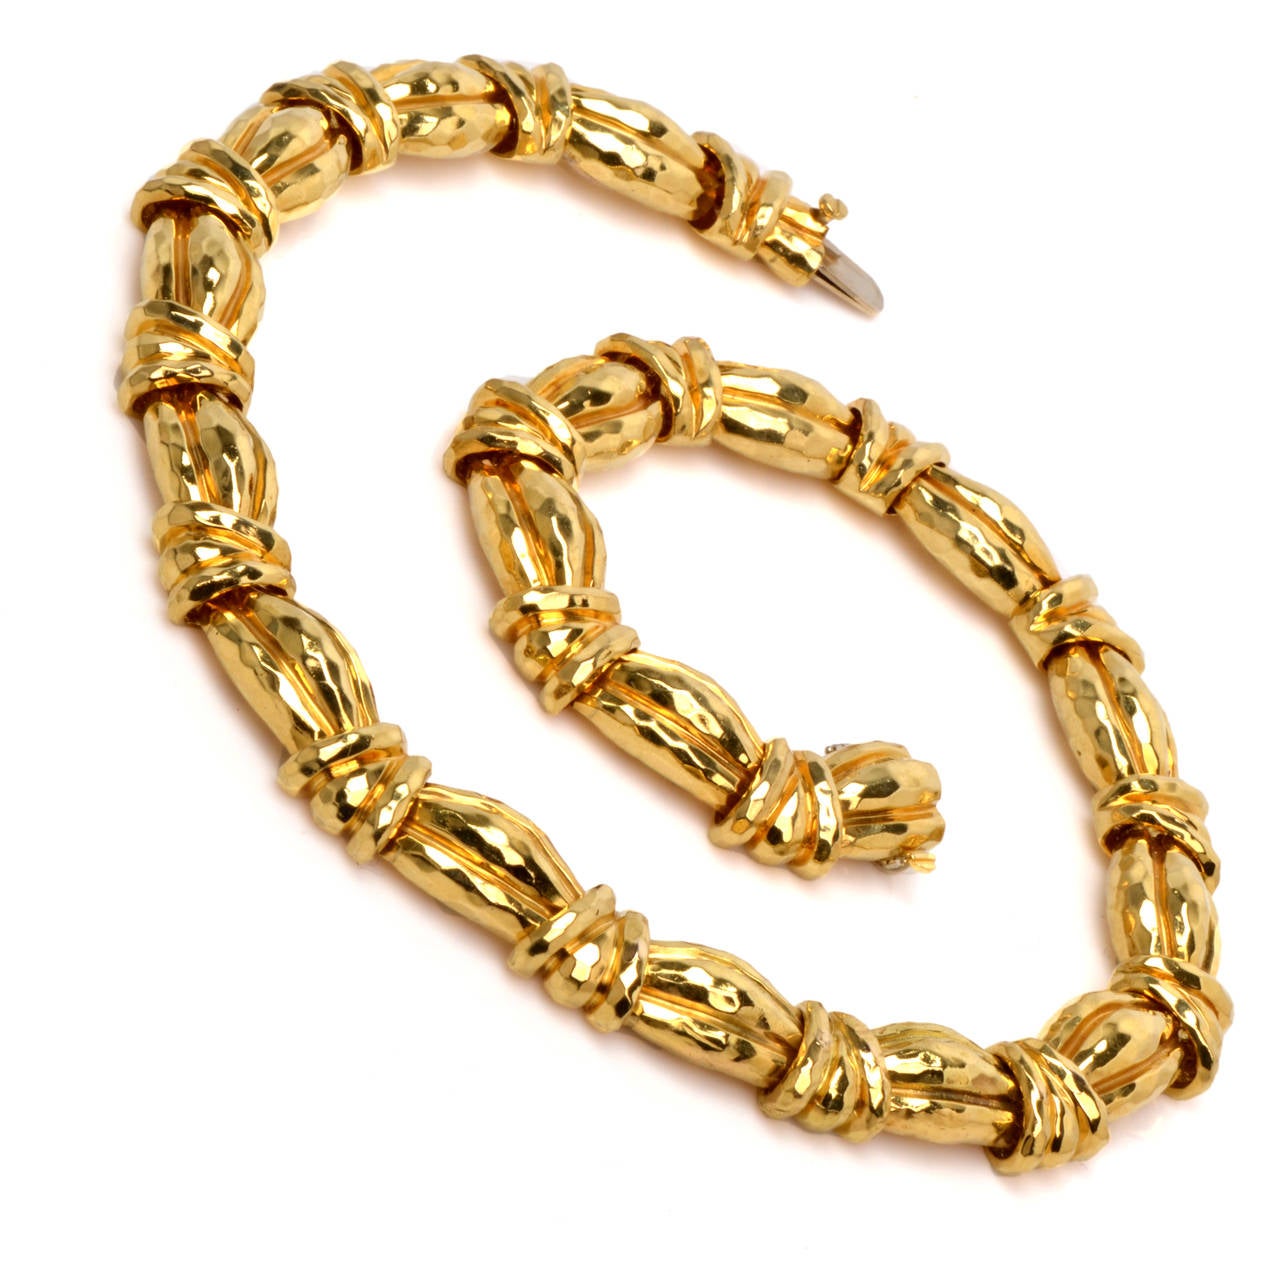 This Henry Dunay necklace of opulent aesthetic and considerable weight is crafted by Dunay Jewelers of Pennsylvania and bears the goldsmith's trademark on the tongue-and-groove clasp. This quintessentially Retro style necklace incorporates  18 